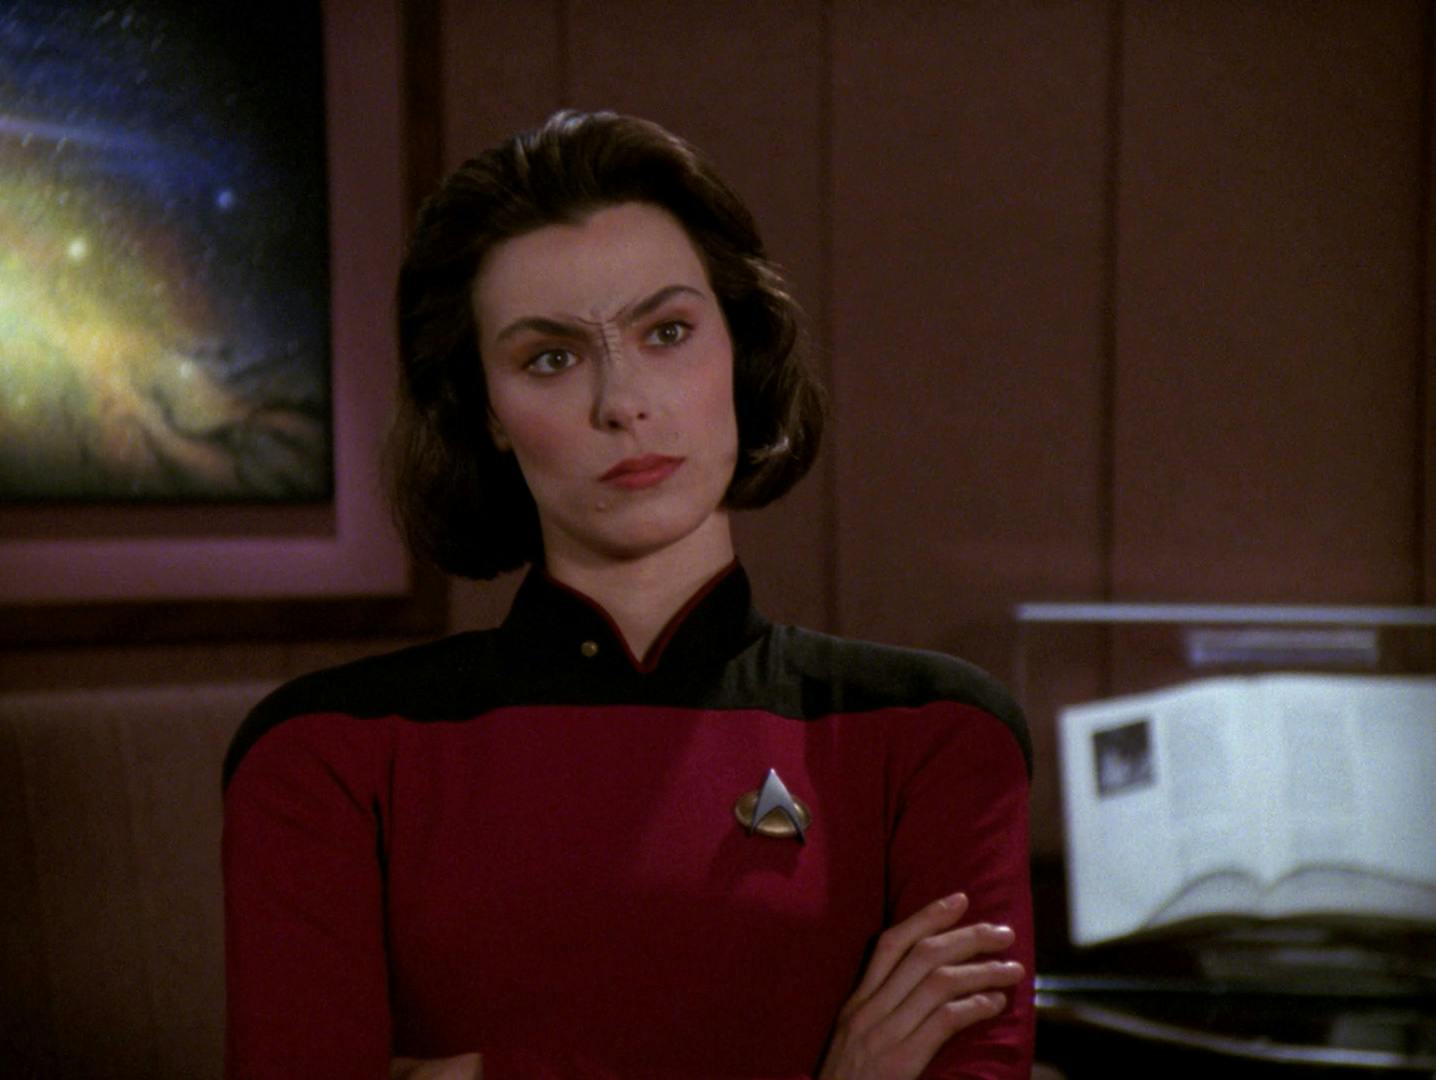 In Picard's Ready Room, Ro Laren displays her typical demeanor - surly, arms crossed - in 'Ensign Ro'